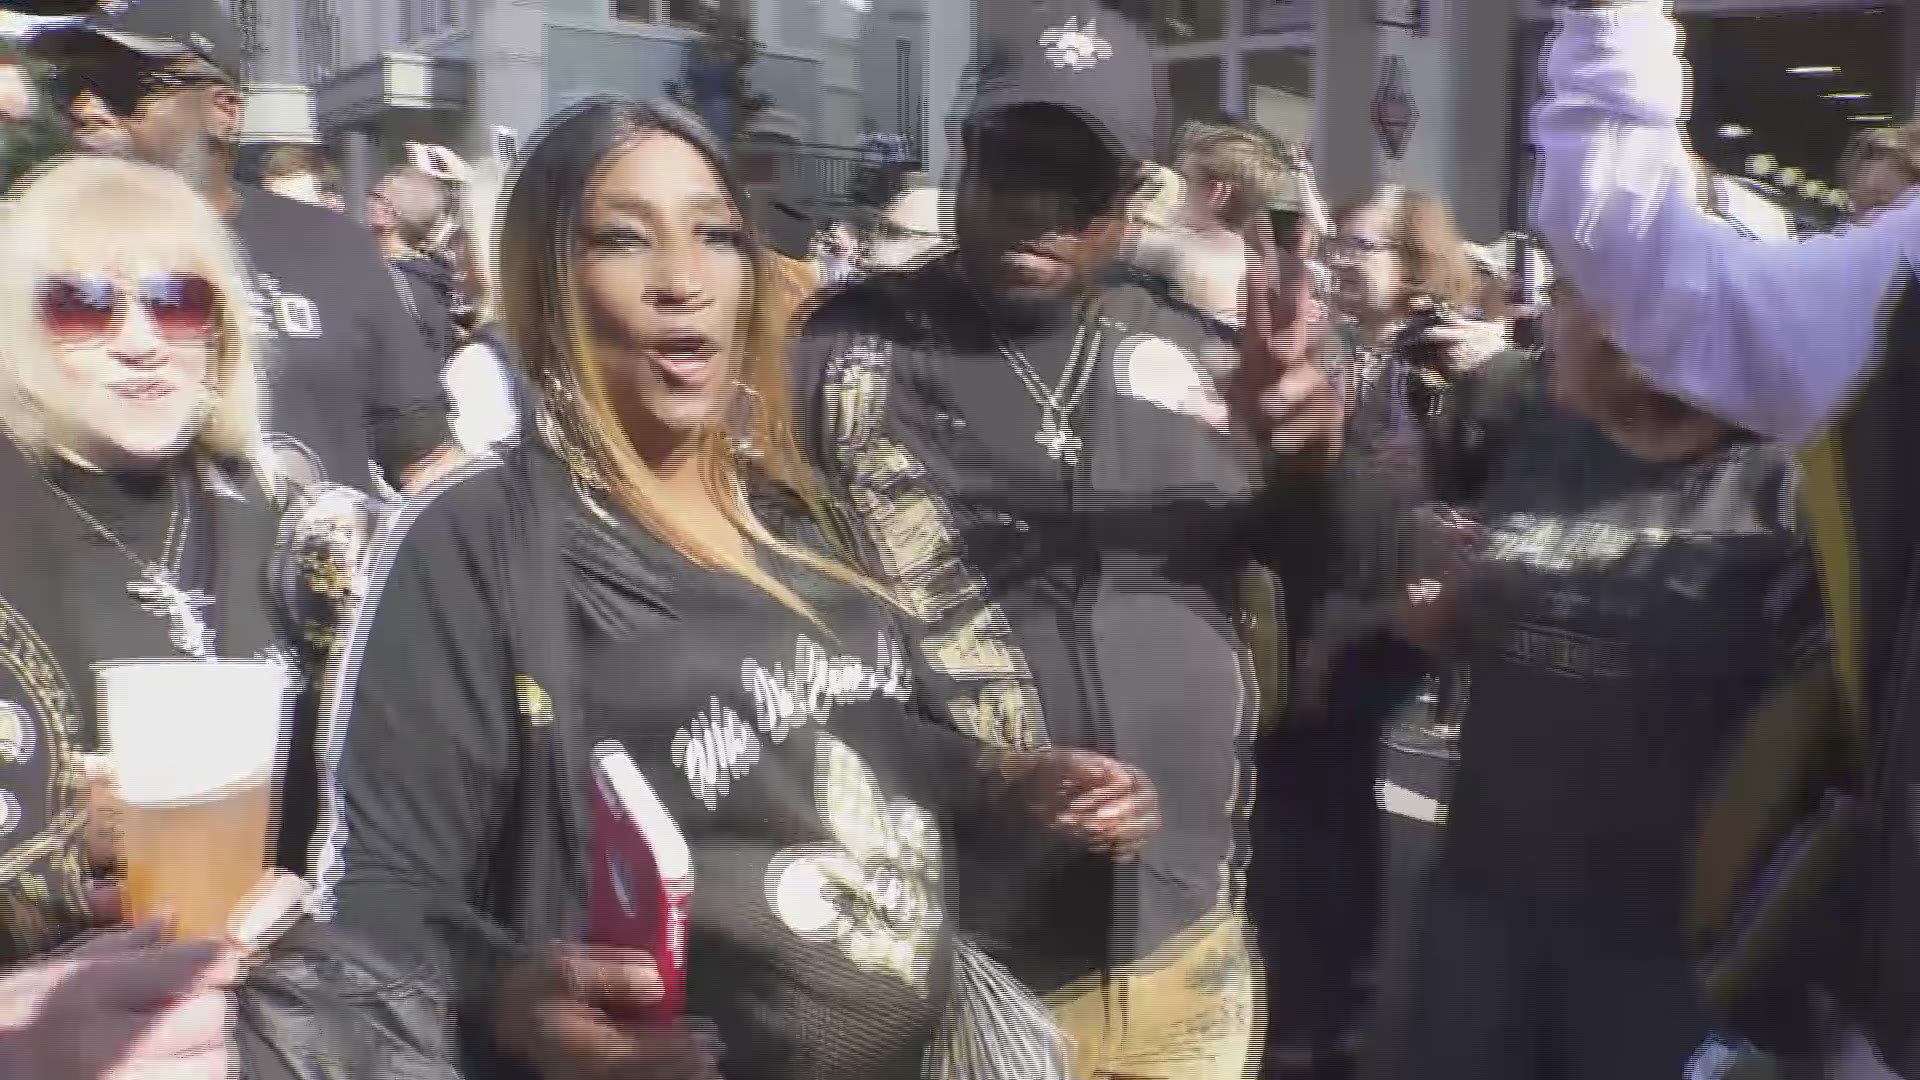 Thousands of people turned out all over New Orleans for anti-Super Bowl second line in the French Quarter.